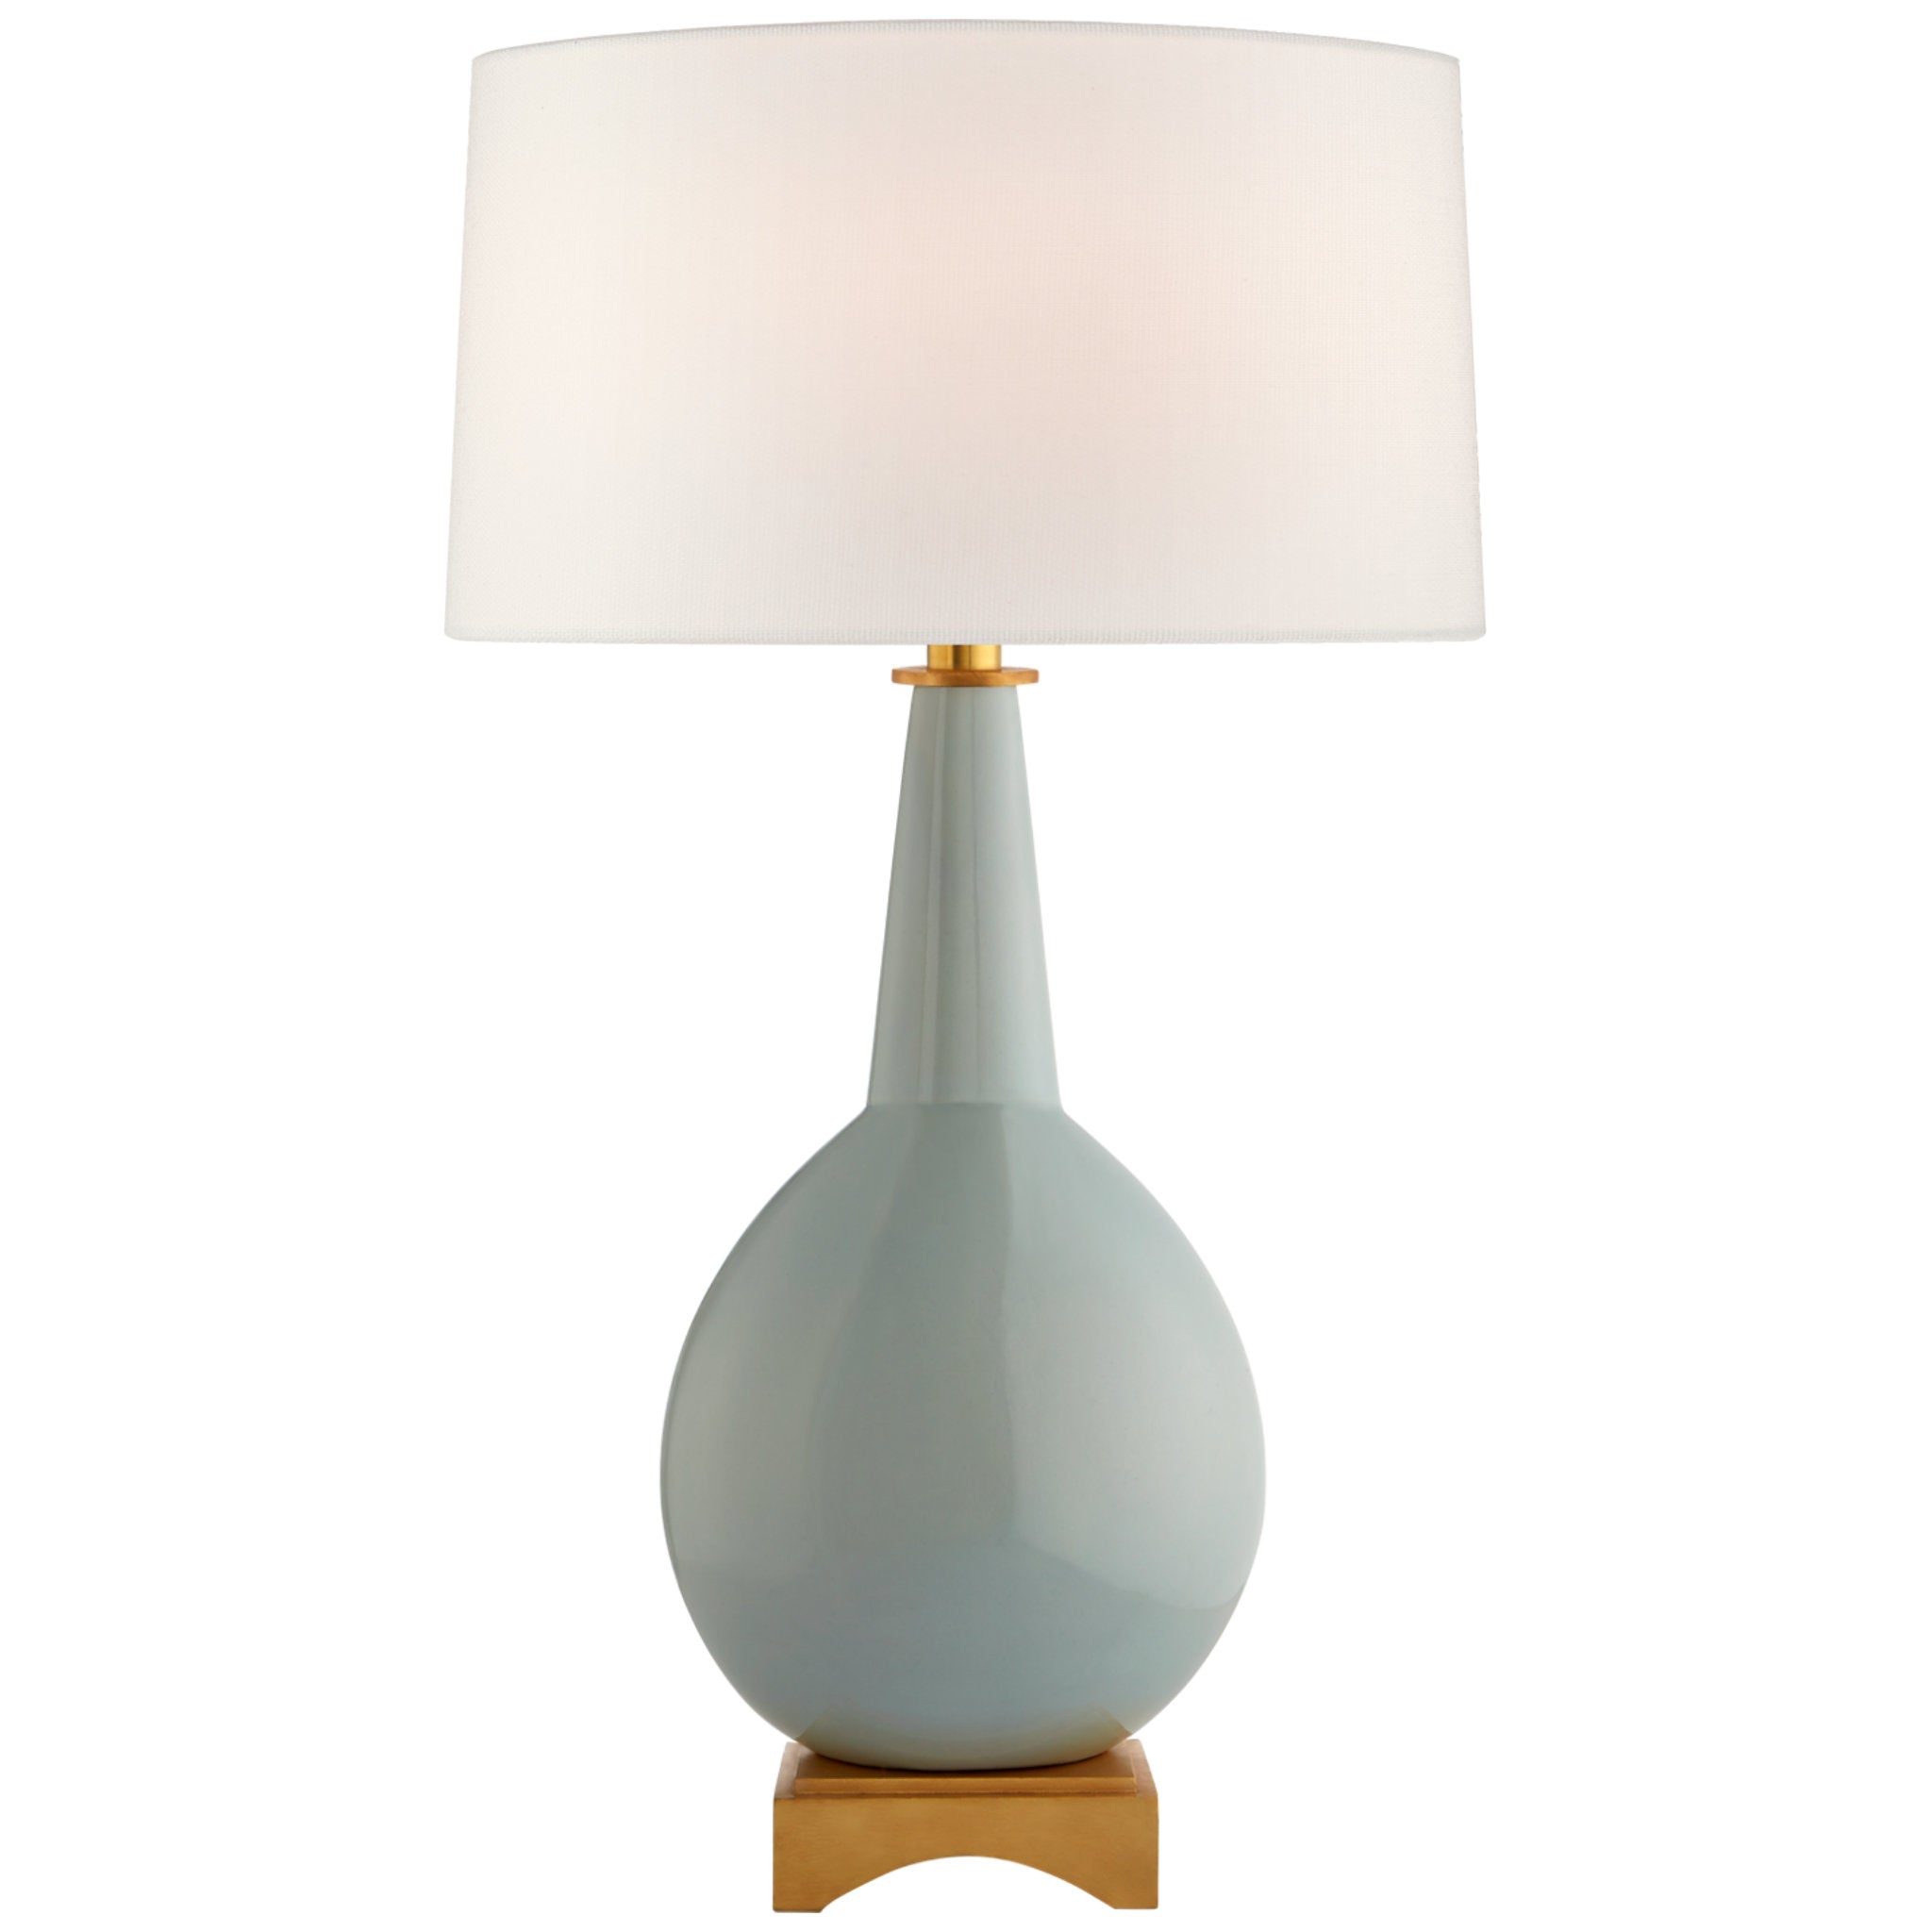 Champalimaud Fondant Small Table Lamp in Ivory and Soft Brass with Linen  Shade